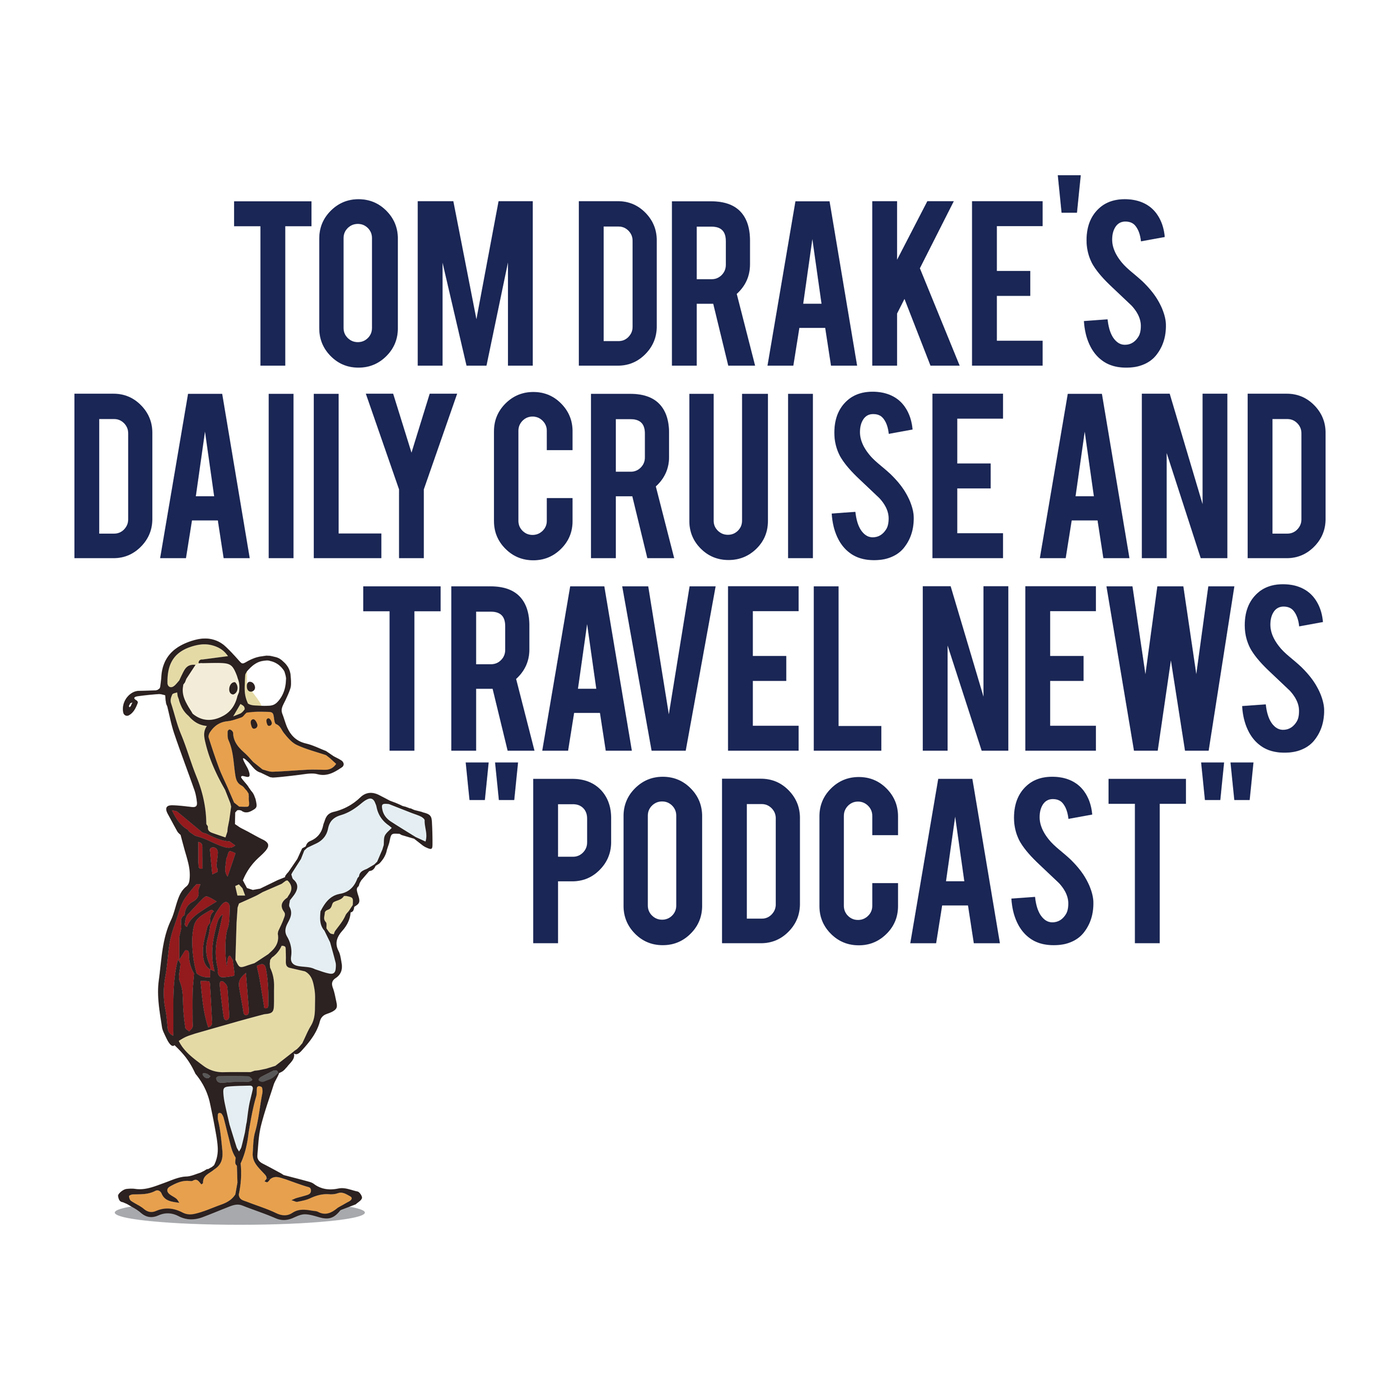 PODCAST FOR JANUARY 16, 2022. MORE CRUISE SHIPS RESCUE MORE CUBAN REFUGEES.